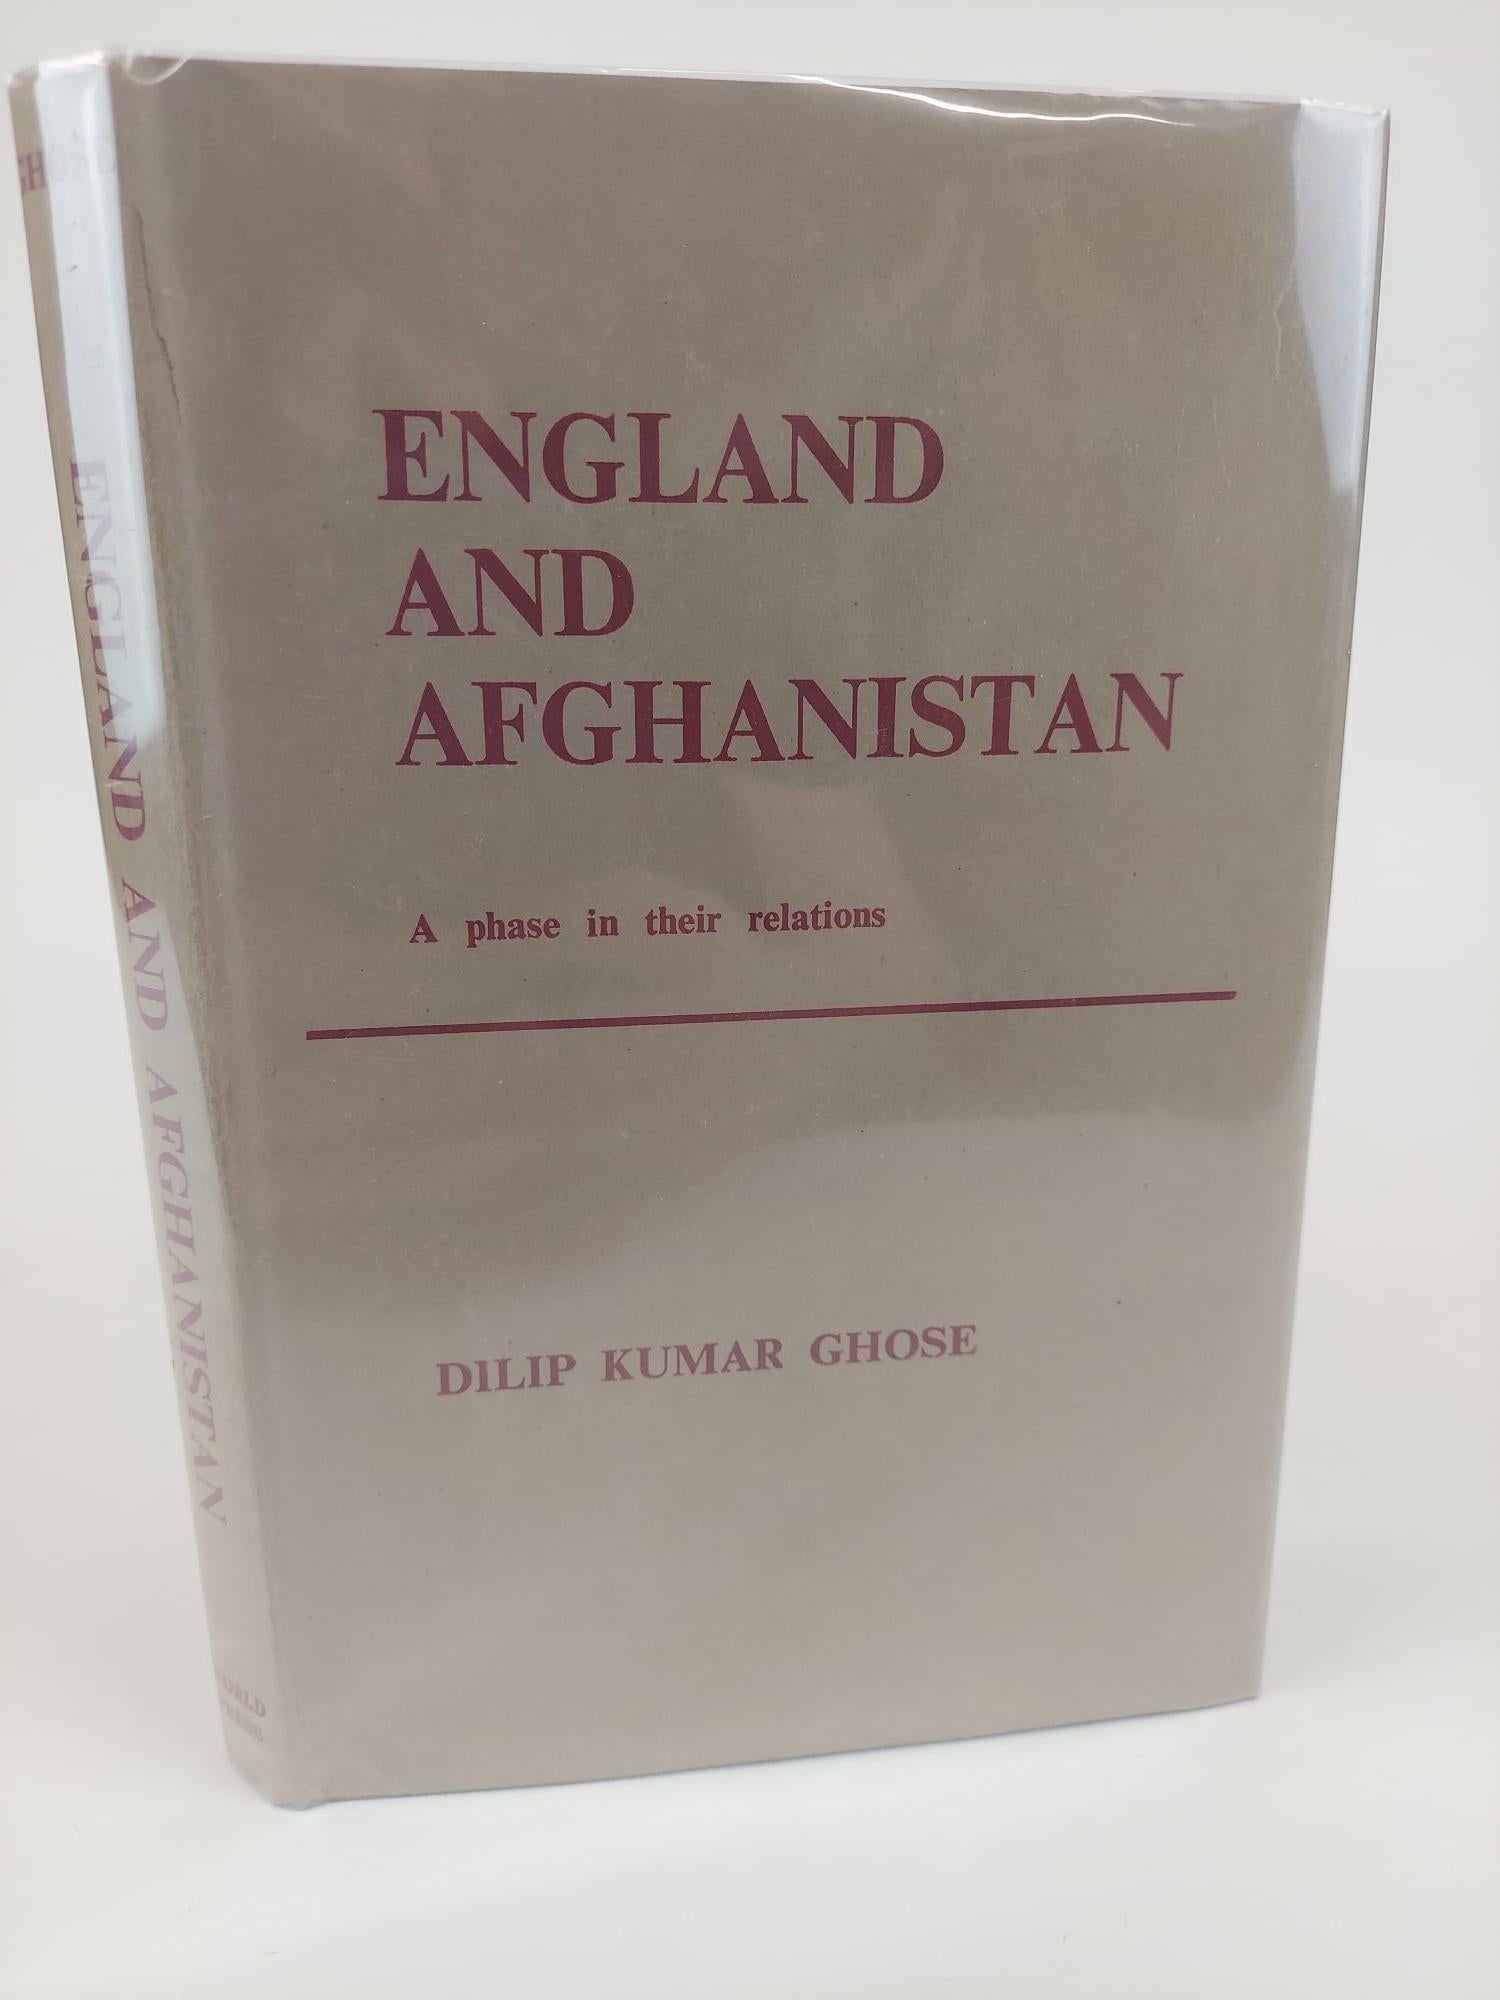 1367918 ENGLAND AND AFGHANISTAN: A PHASE IN THEIR RELATIONS. Dilip Kumar Ghose.